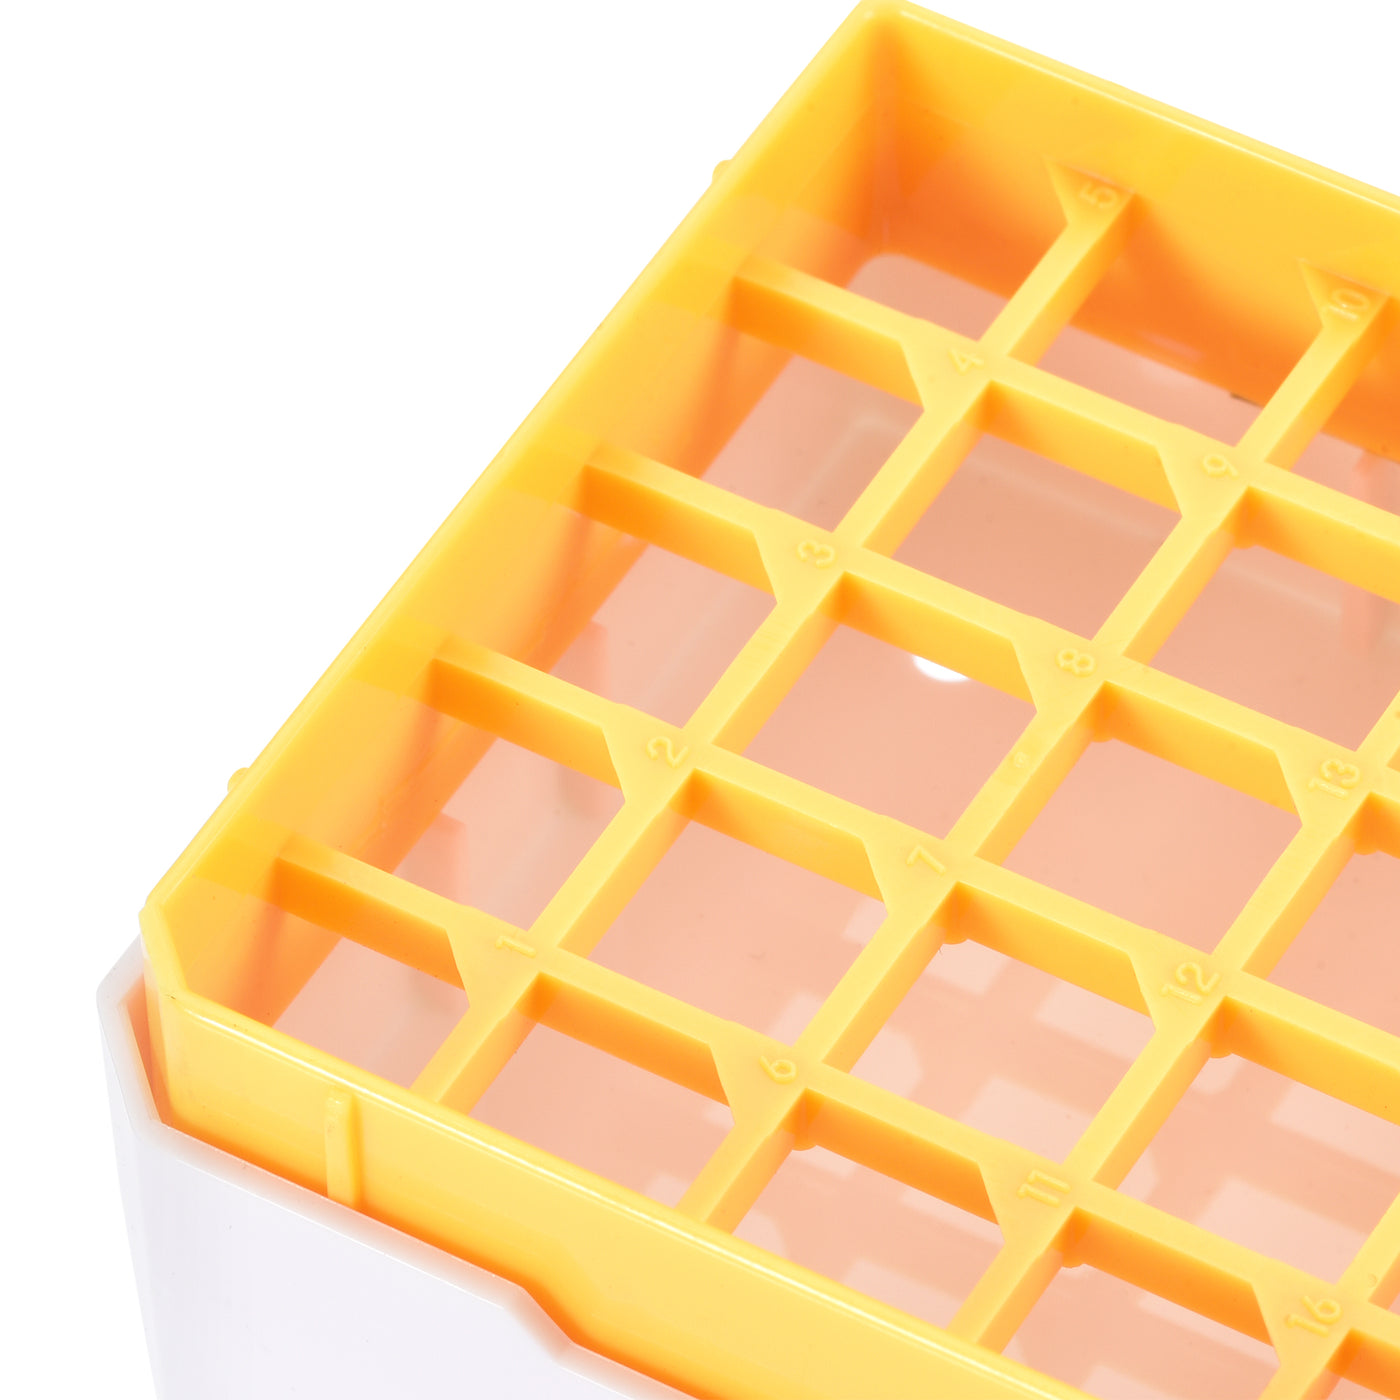 uxcell Uxcell Freezer Tube Box 25 Places Polypropylene Holder Rack for 1.8/2ml Microcentrifuge Tubes, Yellow 4Pcs